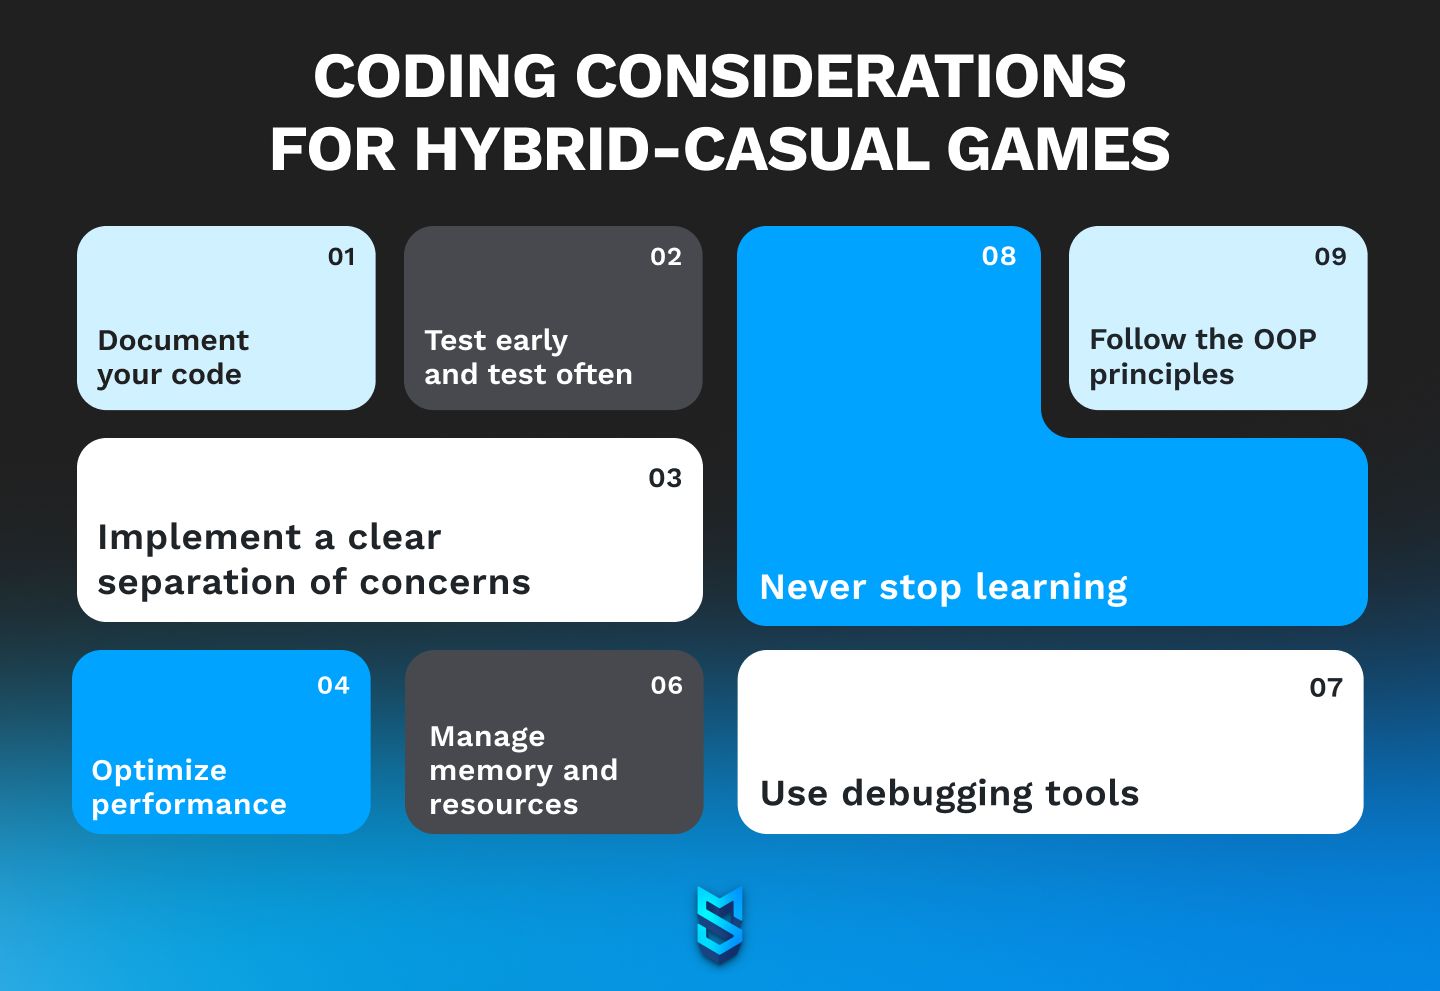 Coding considerations for hybrid games